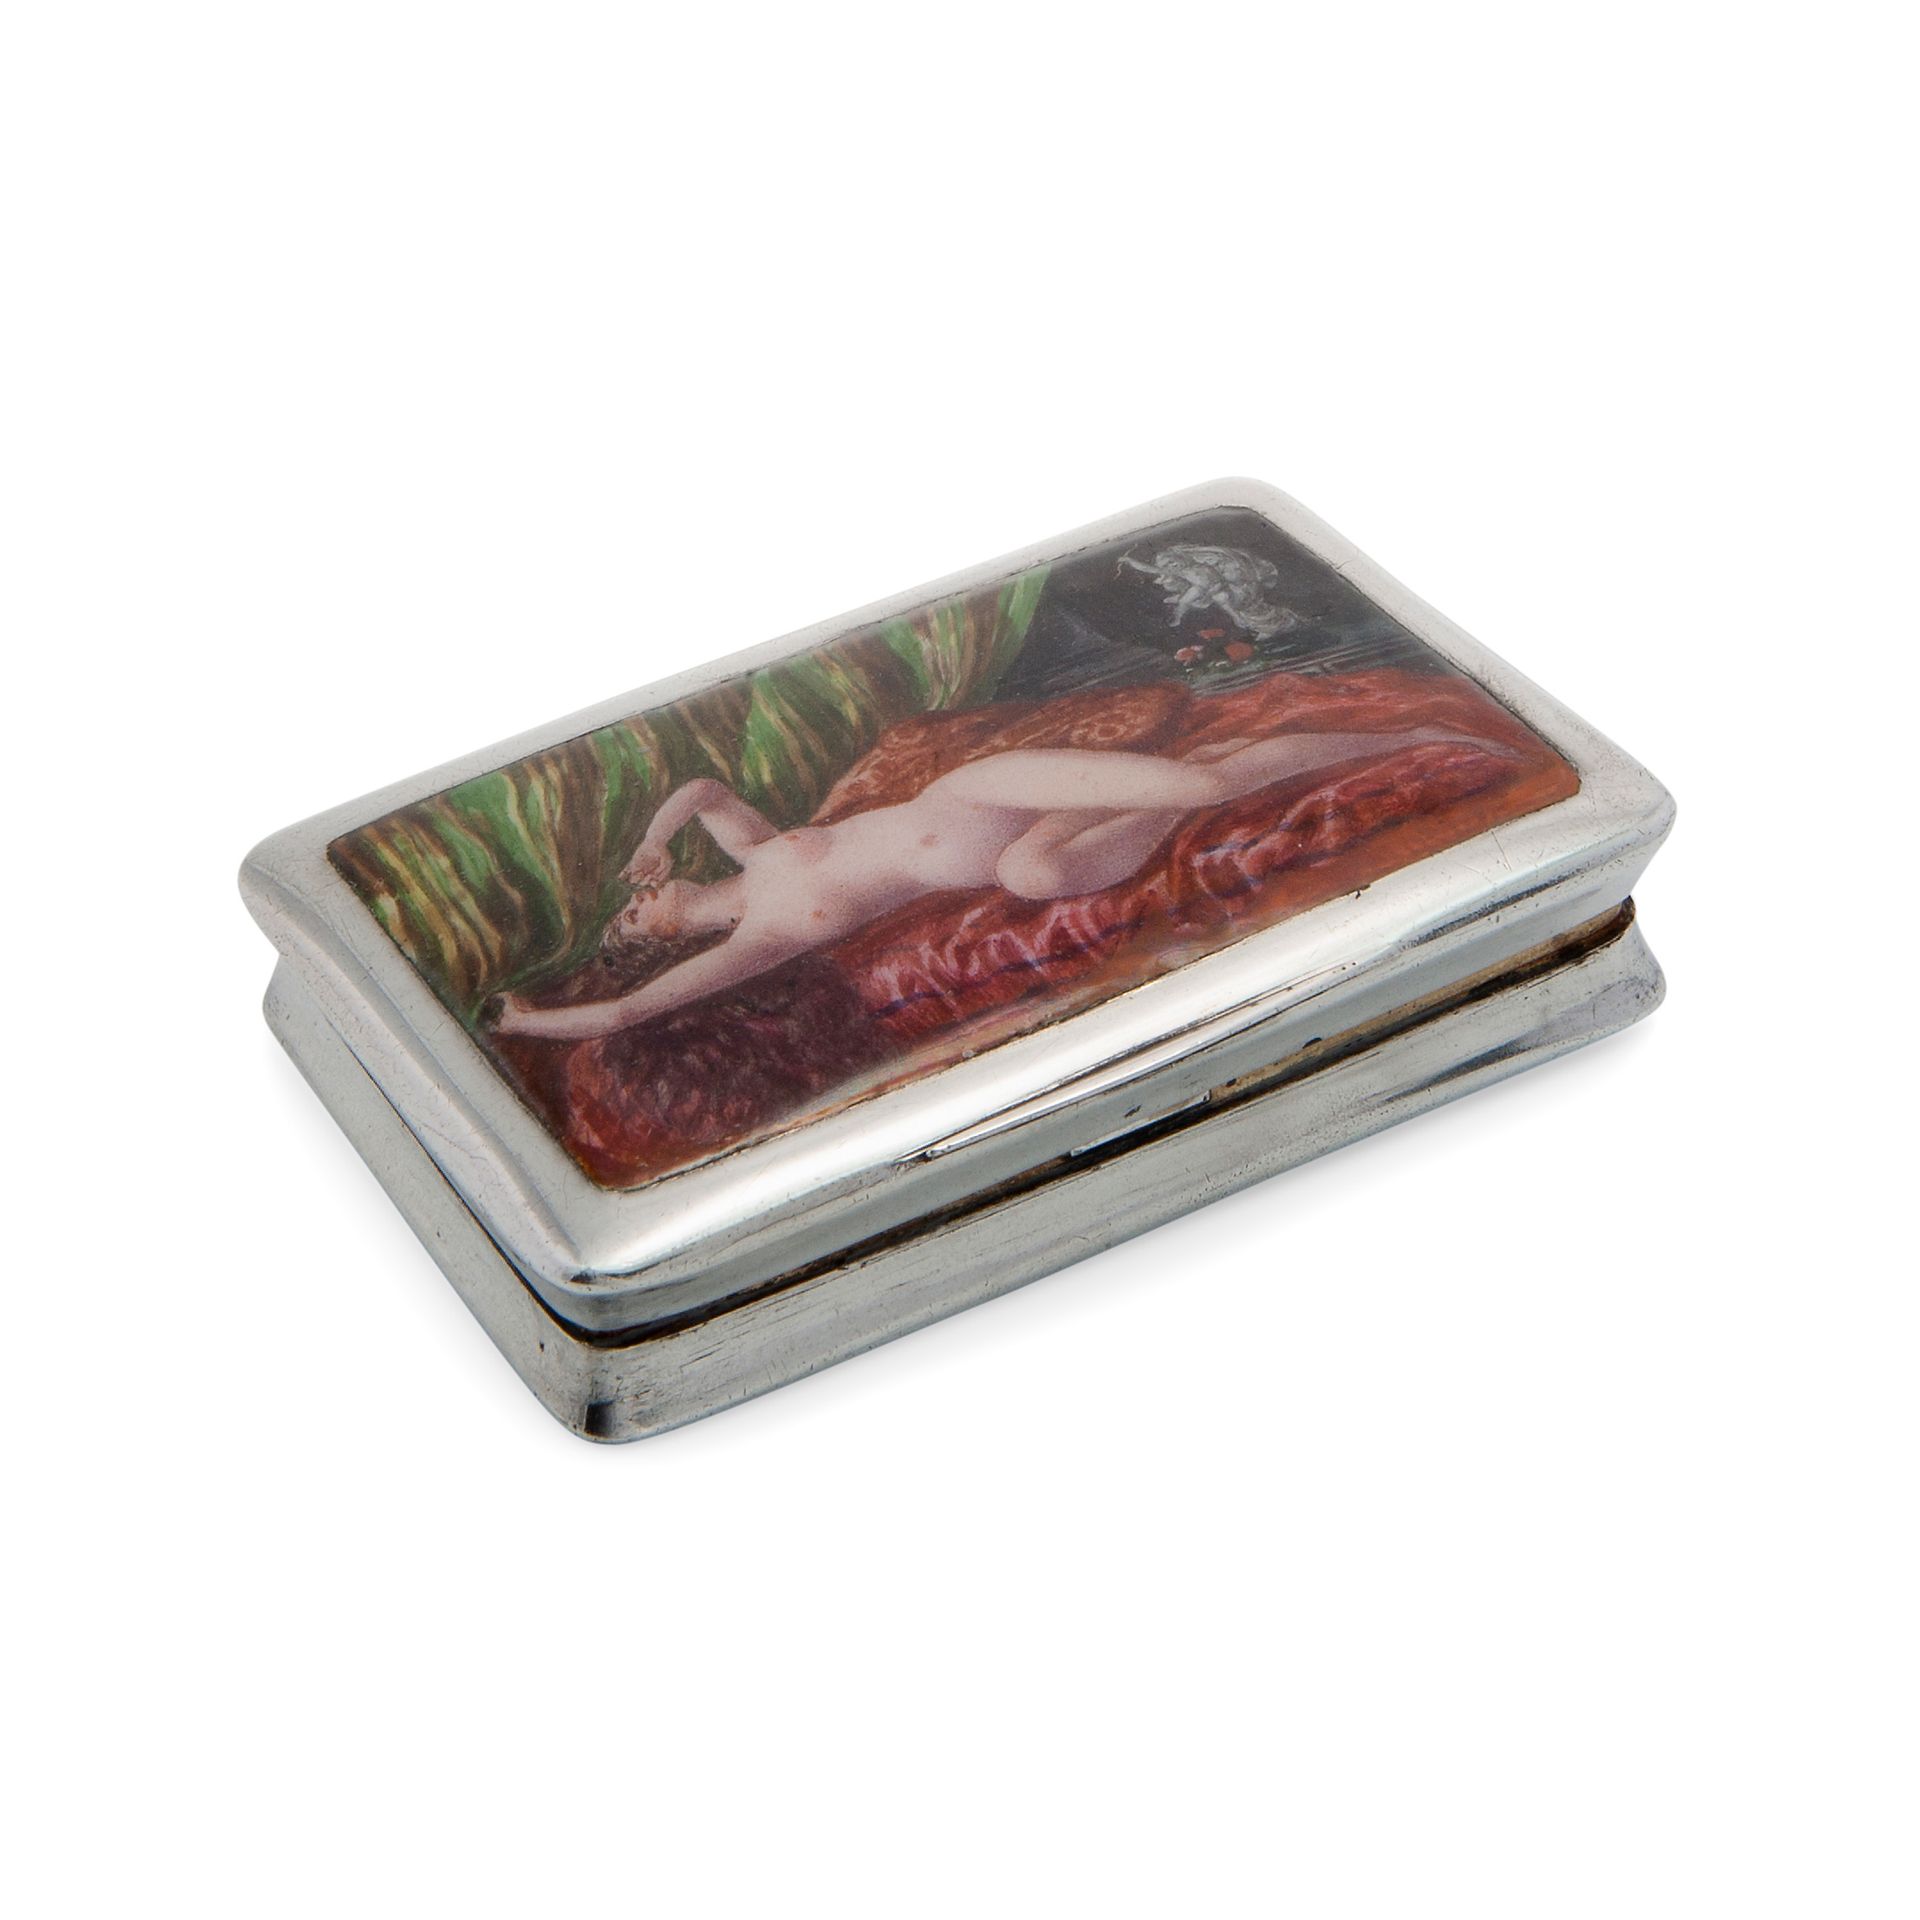 Snuff box with nude in a bedroom, 20th century European manufacture Hergestellt &hellip;